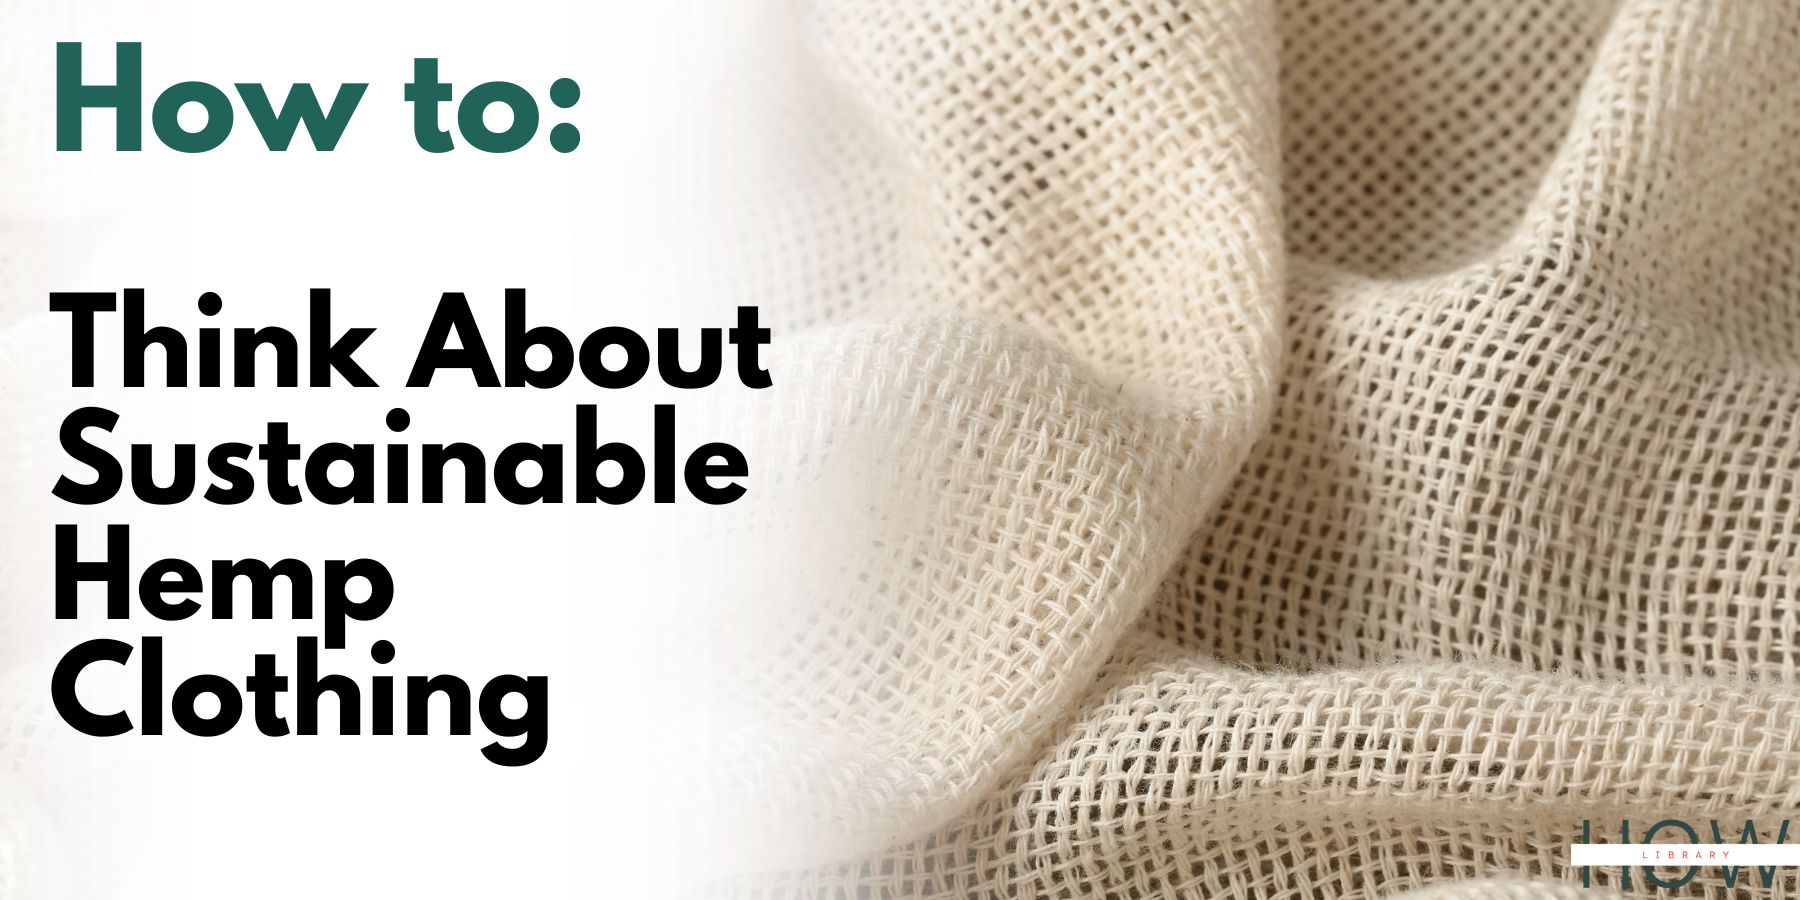 How To Think About Sustainable Hemp Clothing - Howtorary